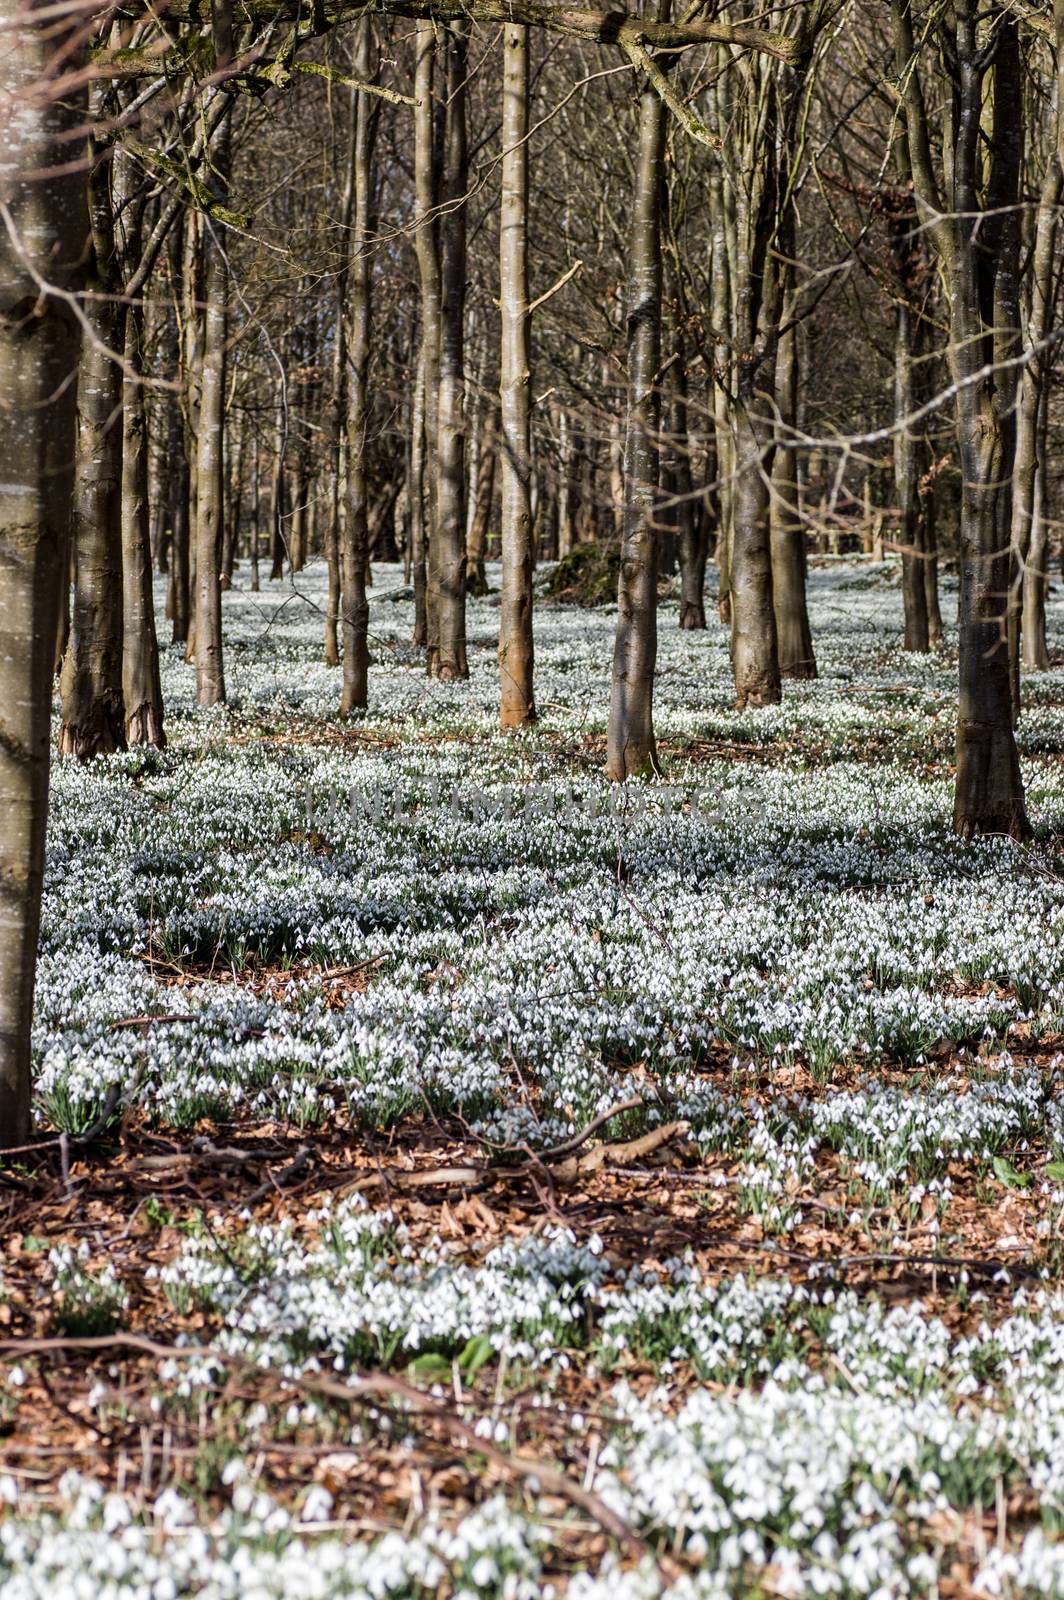 View of a wood carpeted with blooming snowdrops. Welford Park, near Newbury, Berkshire.